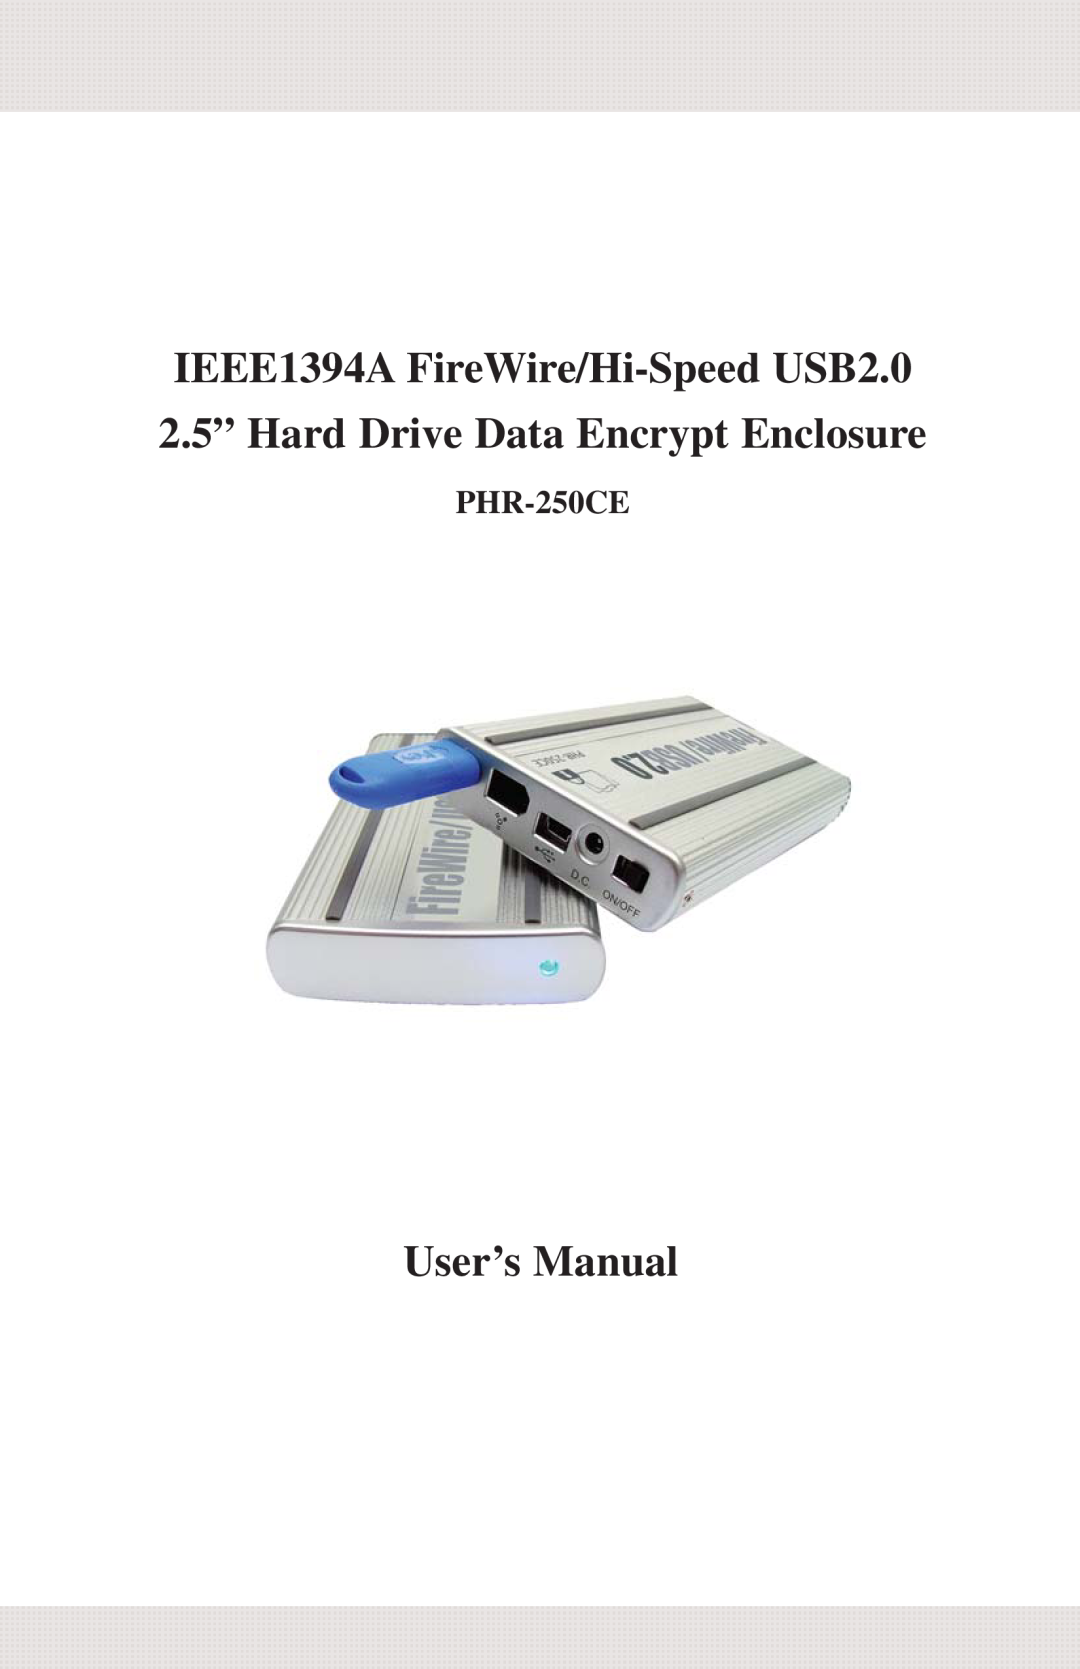 Macally PHR-250CE user manual IEEE1394A FireWire/Hi-Speed USB2.0, 2.5” Hard Drive Data Encrypt Enclosure, User’s Manual 